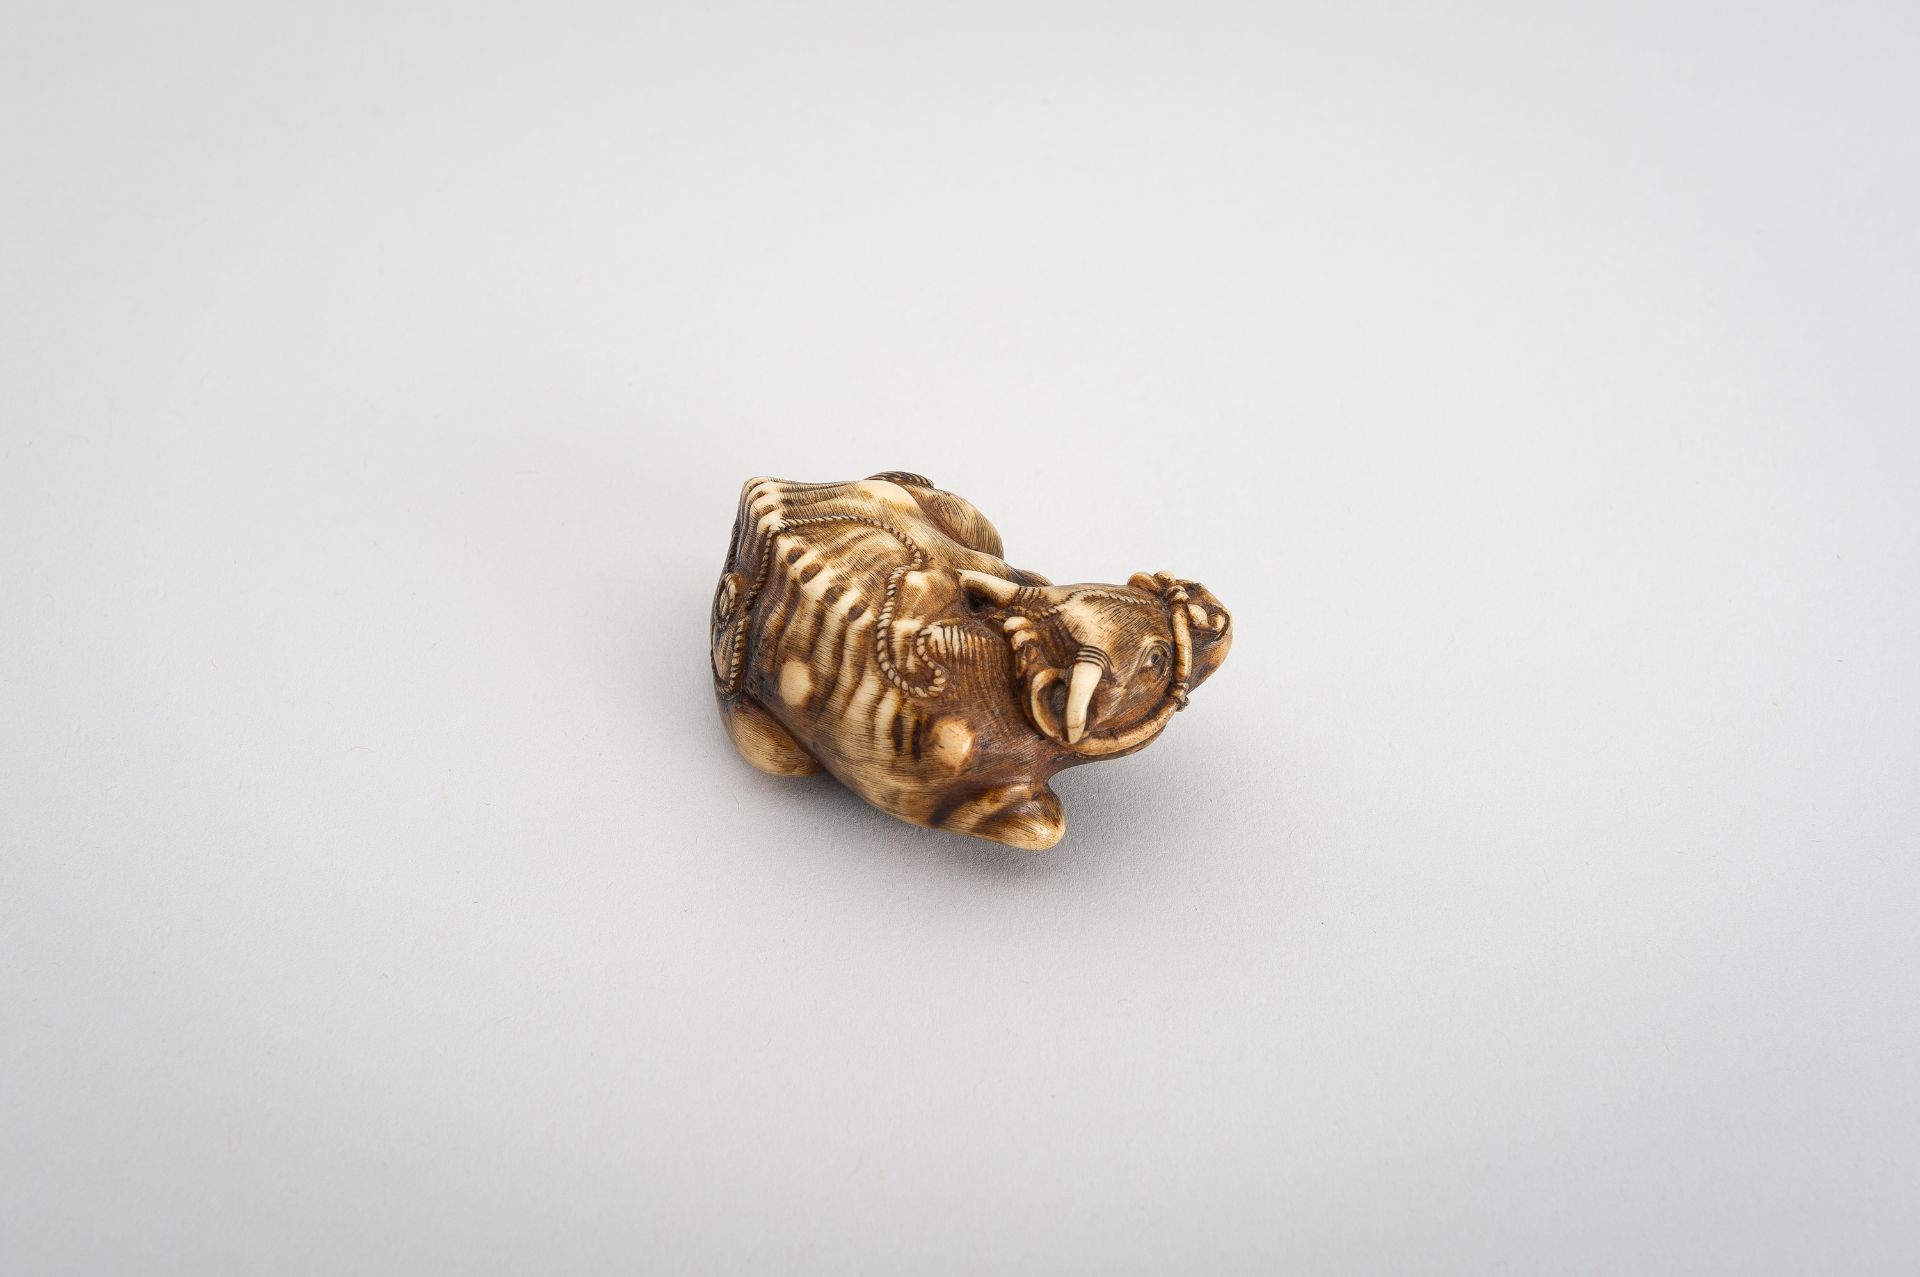 A STAG ANTLER NETSUKE OF RECUMBENT OX - Image 9 of 11